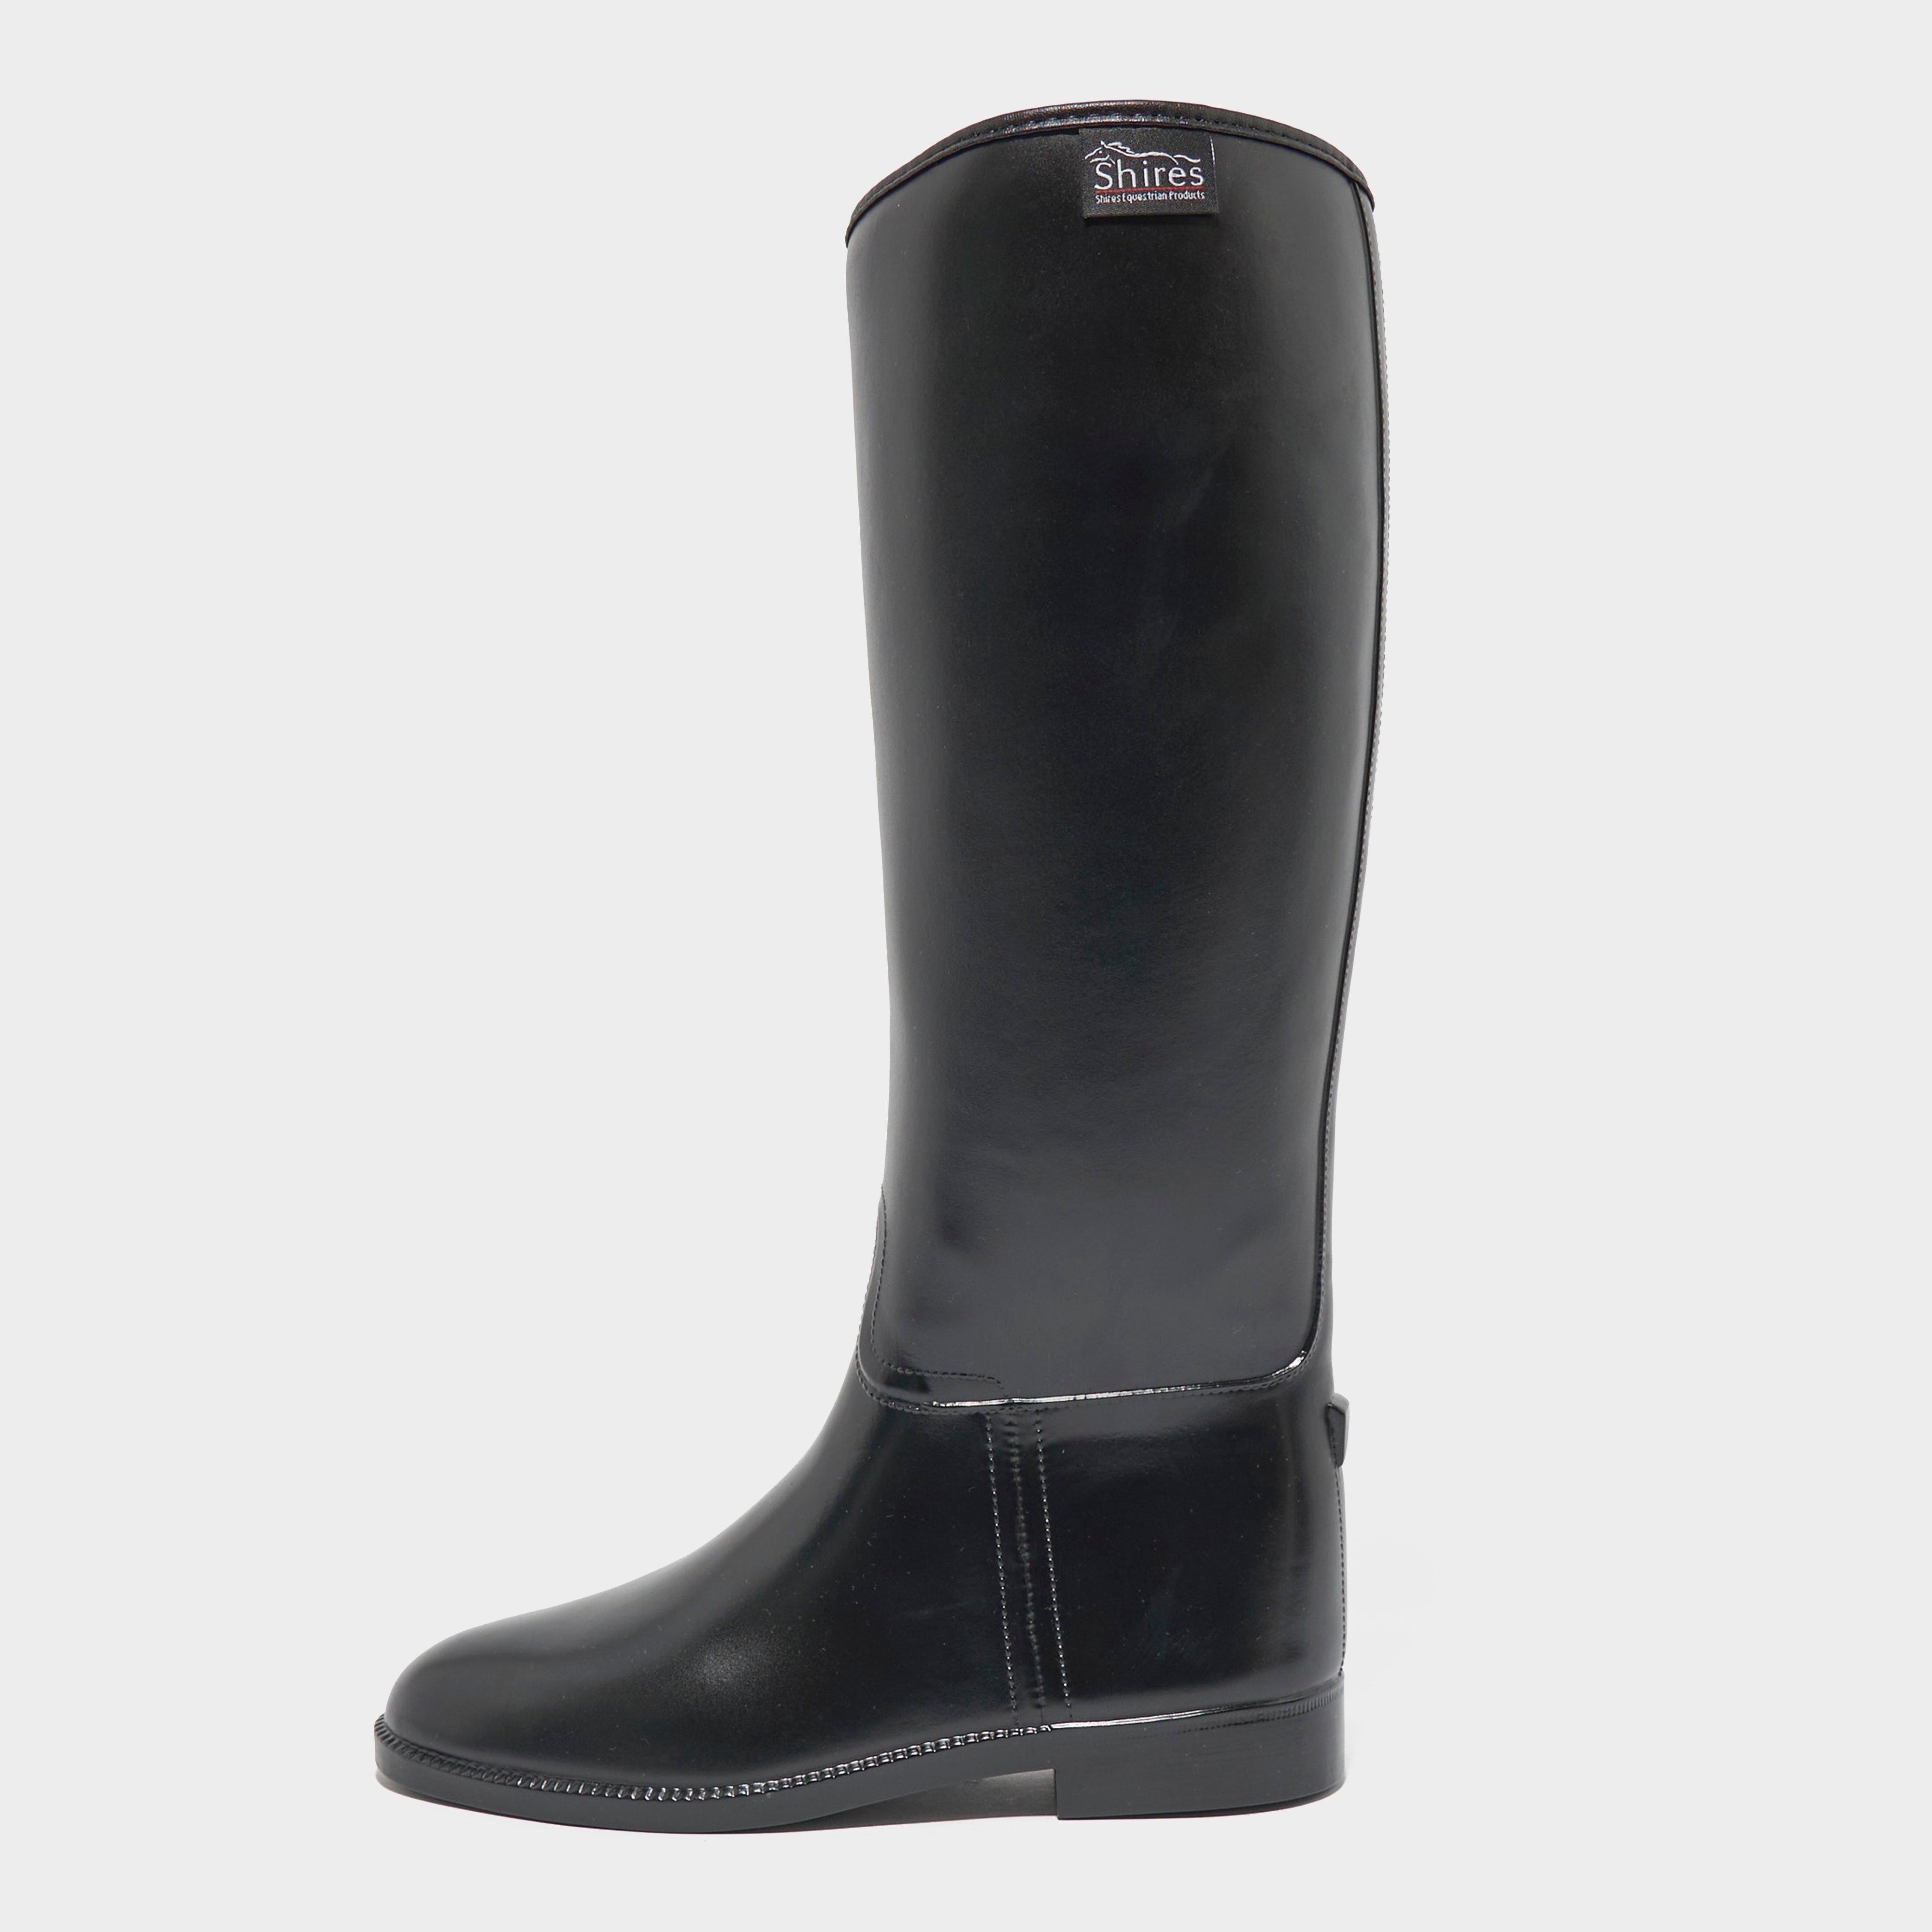 Shires Ladies' Long Rubber Riding Boots (Wide)